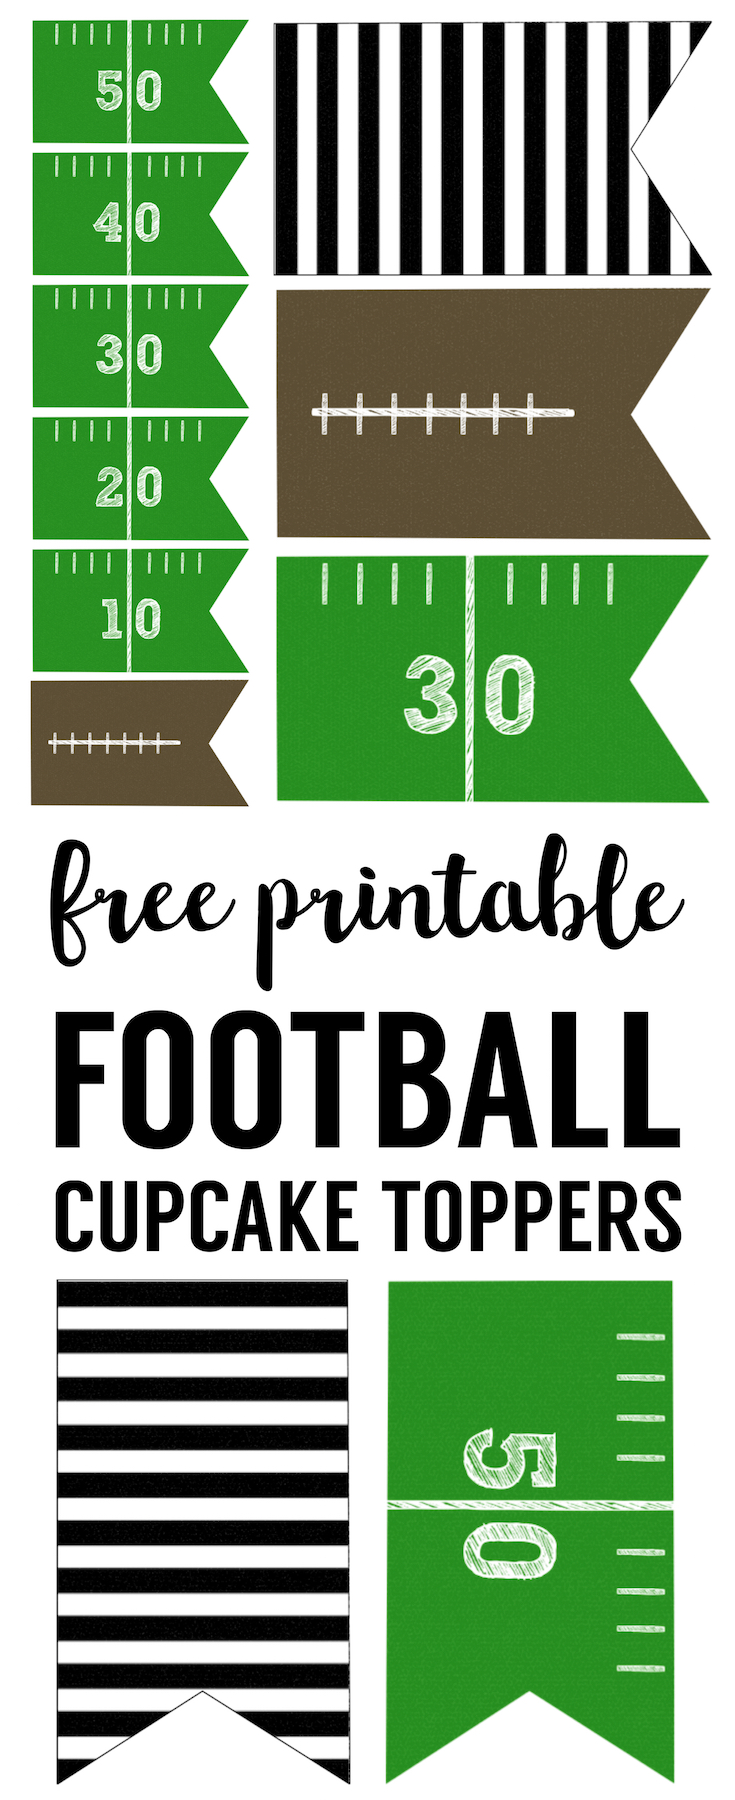 Football Cupcake Toppers Free Printable. Cheap football party decorations! Great football cupcake decorating ideas. Just print and cut!